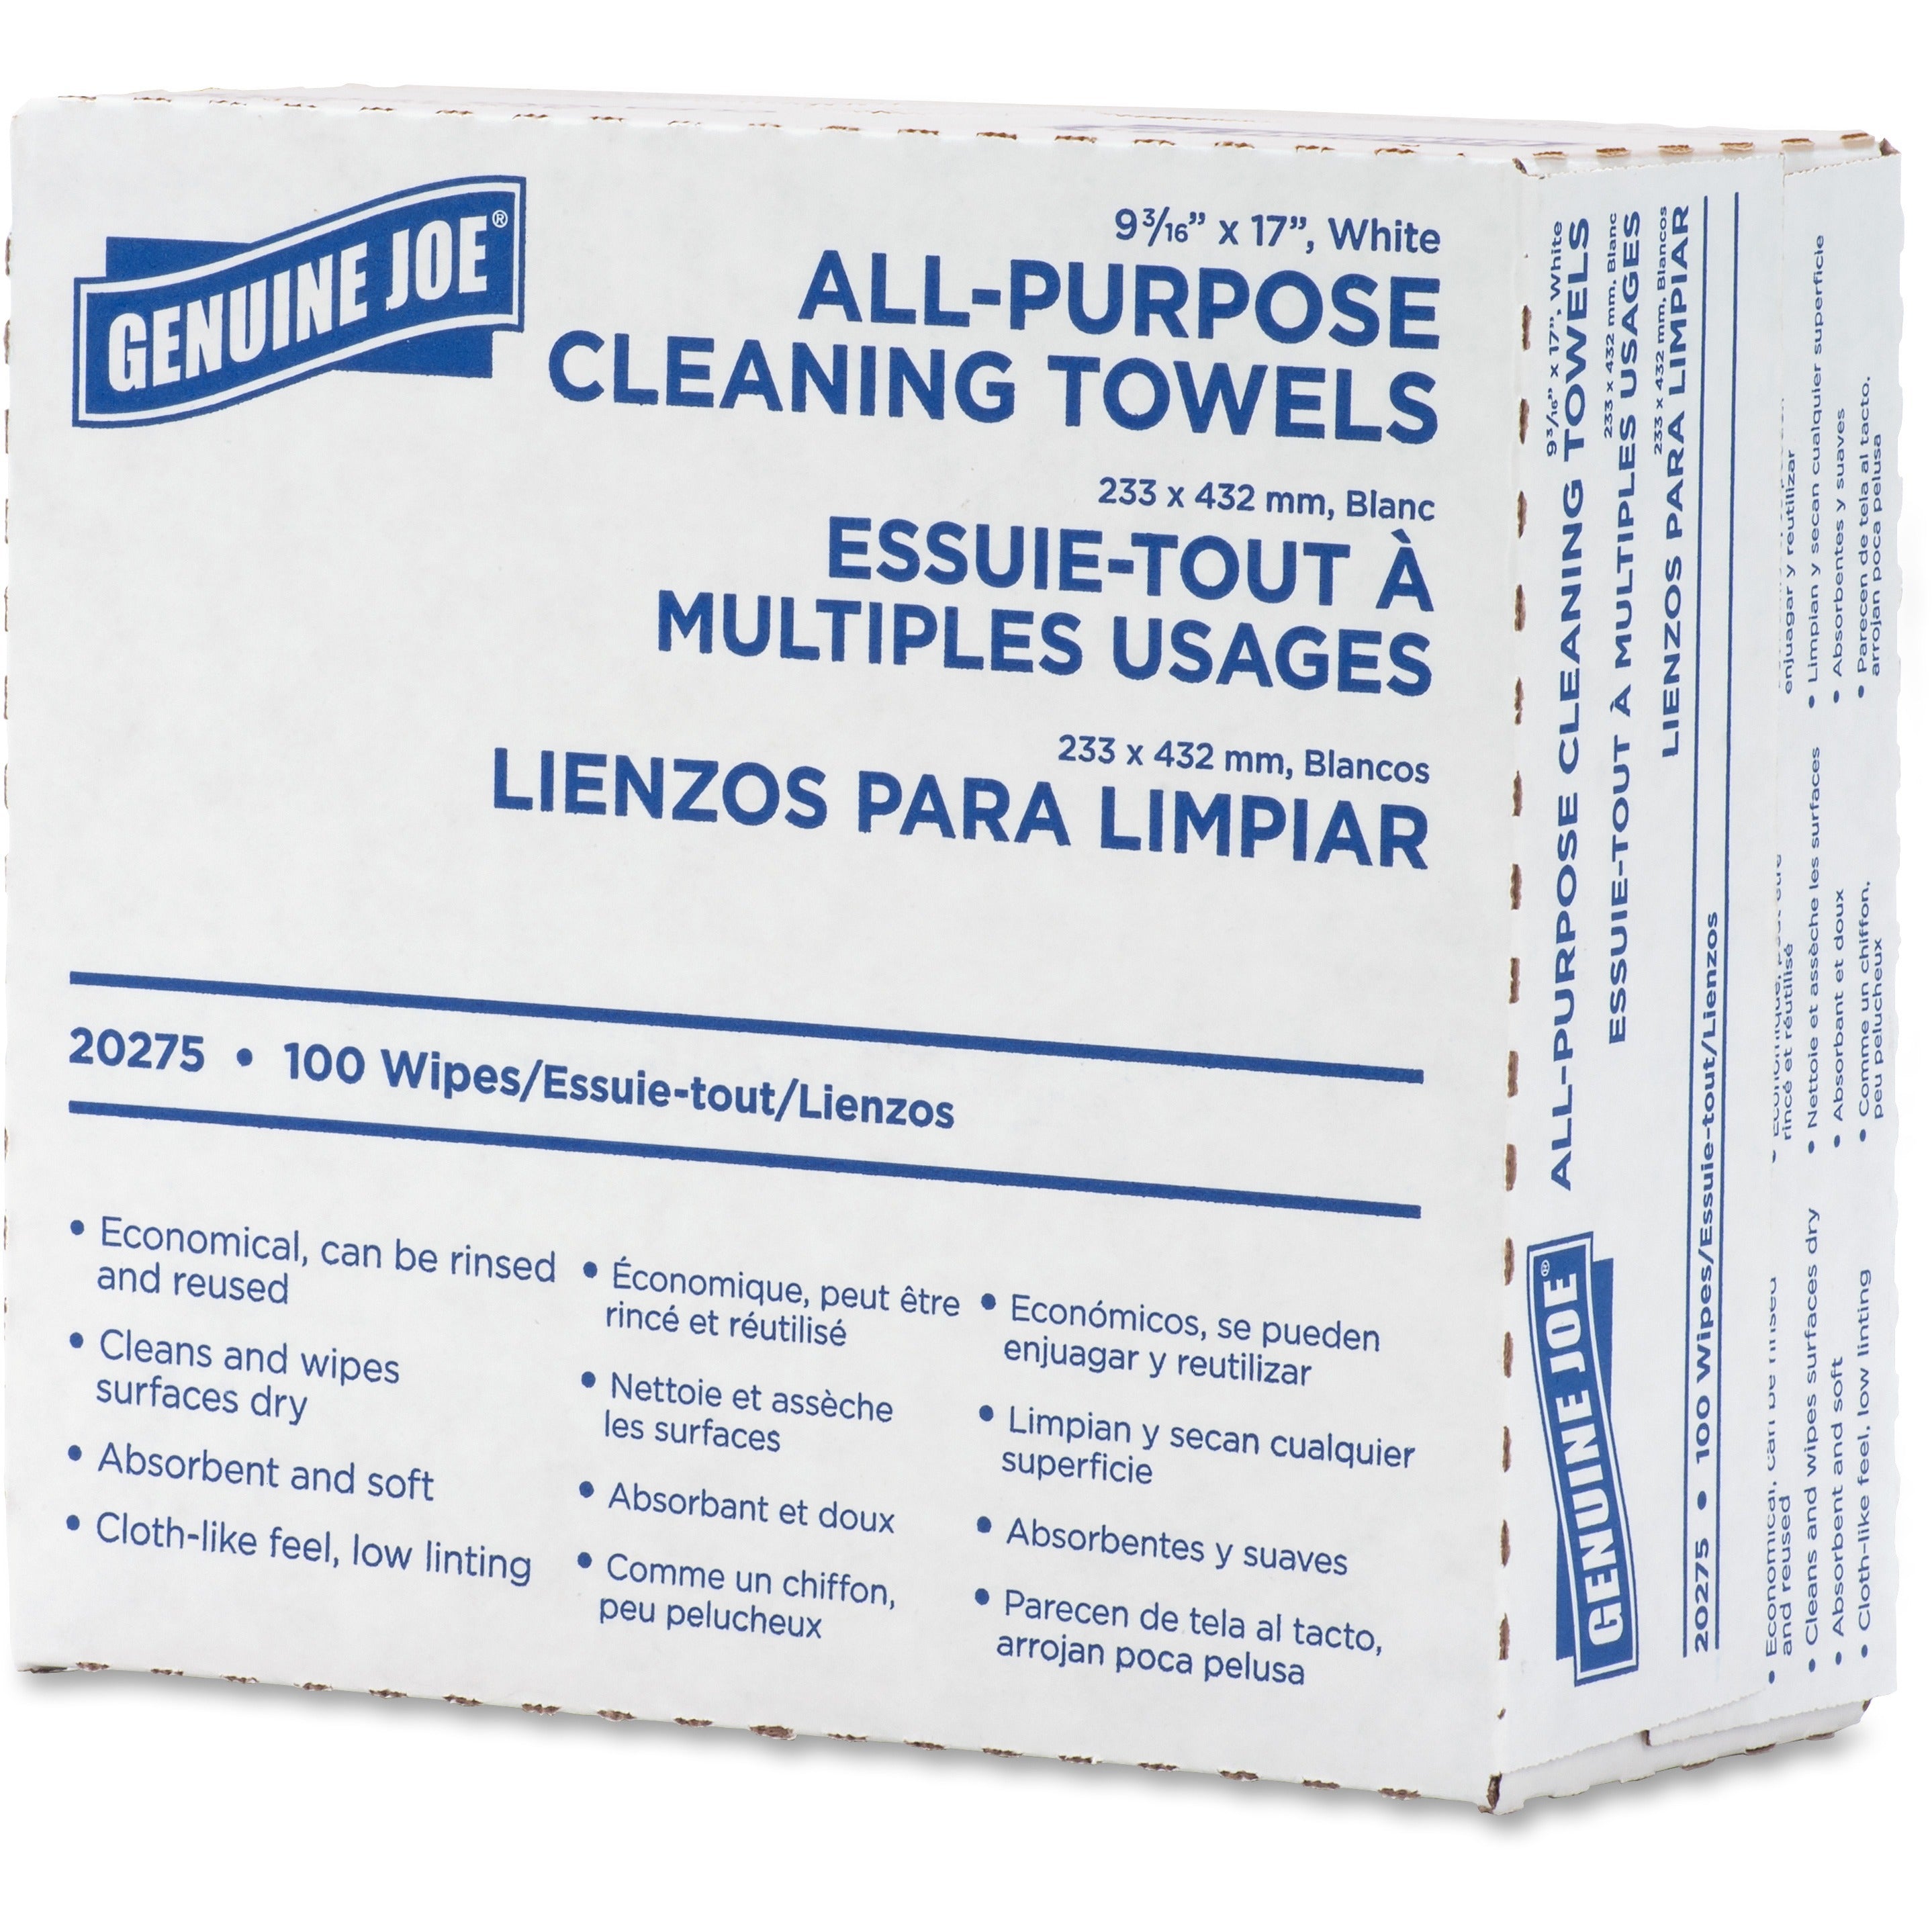 Genuine Joe All-Purpose Cleaning Towels - 16.50" x 9.50" - White - Fabric - Soft, Reusable, Absorbent, Medium Duty - For Multipurpose - 100 / Box - 